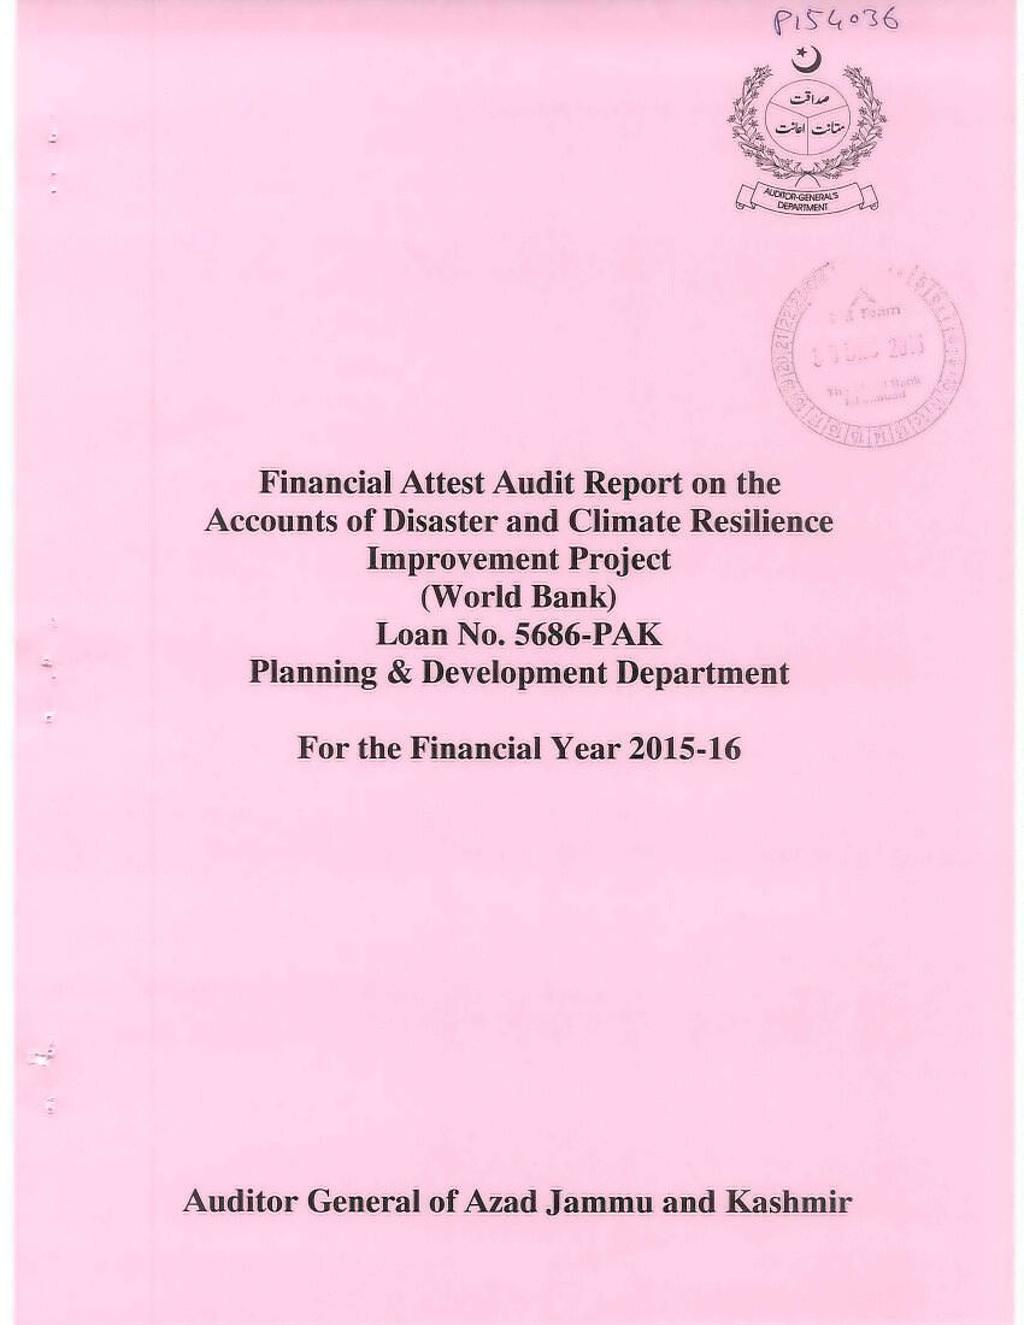 Financial Attest Audit Report on the Accounts of Disaster and Climate Resilience Improvement Project (World Bank) Loan